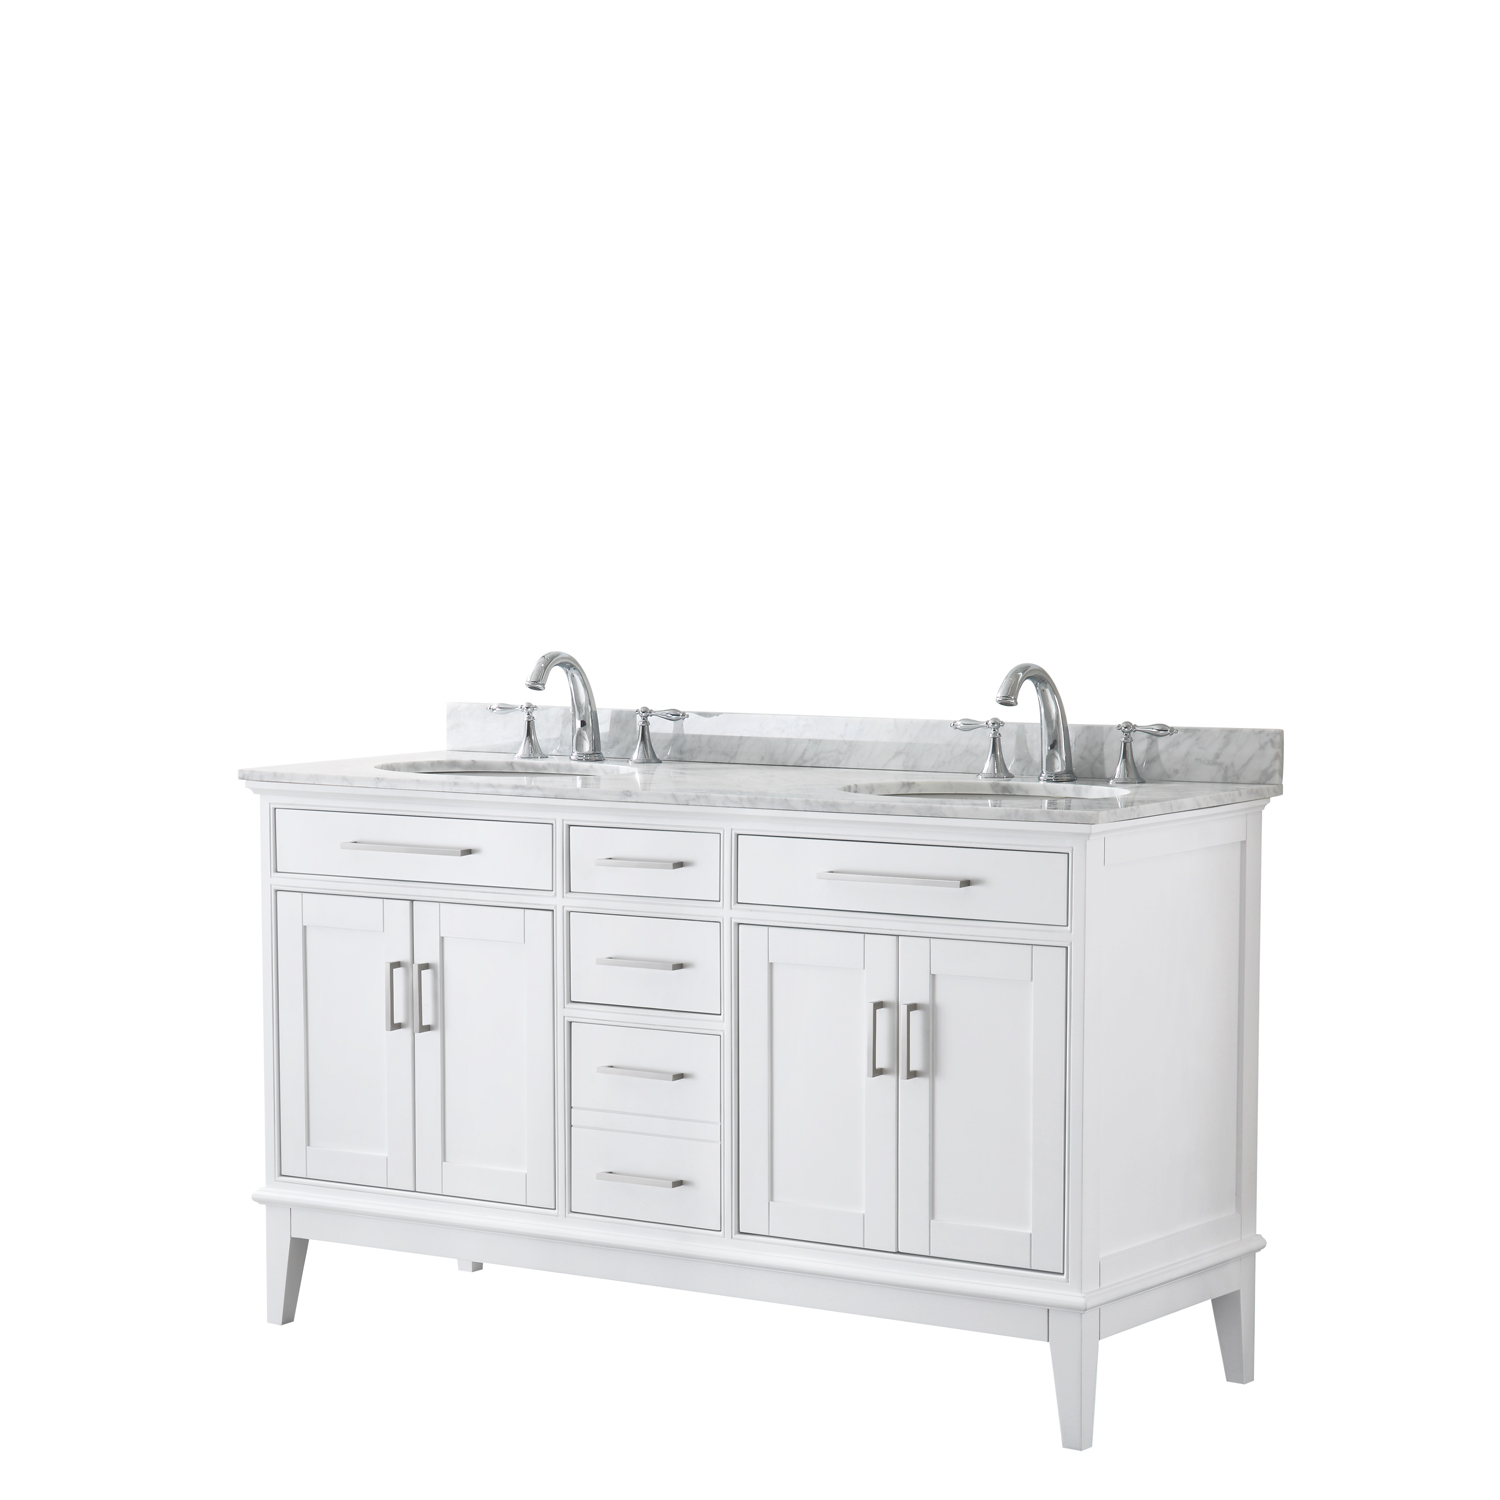 Contemporary 60" Double Bathroom Vanity in White, White Carrara Marble Countertop with Undermount Sinks, and Mirror Options